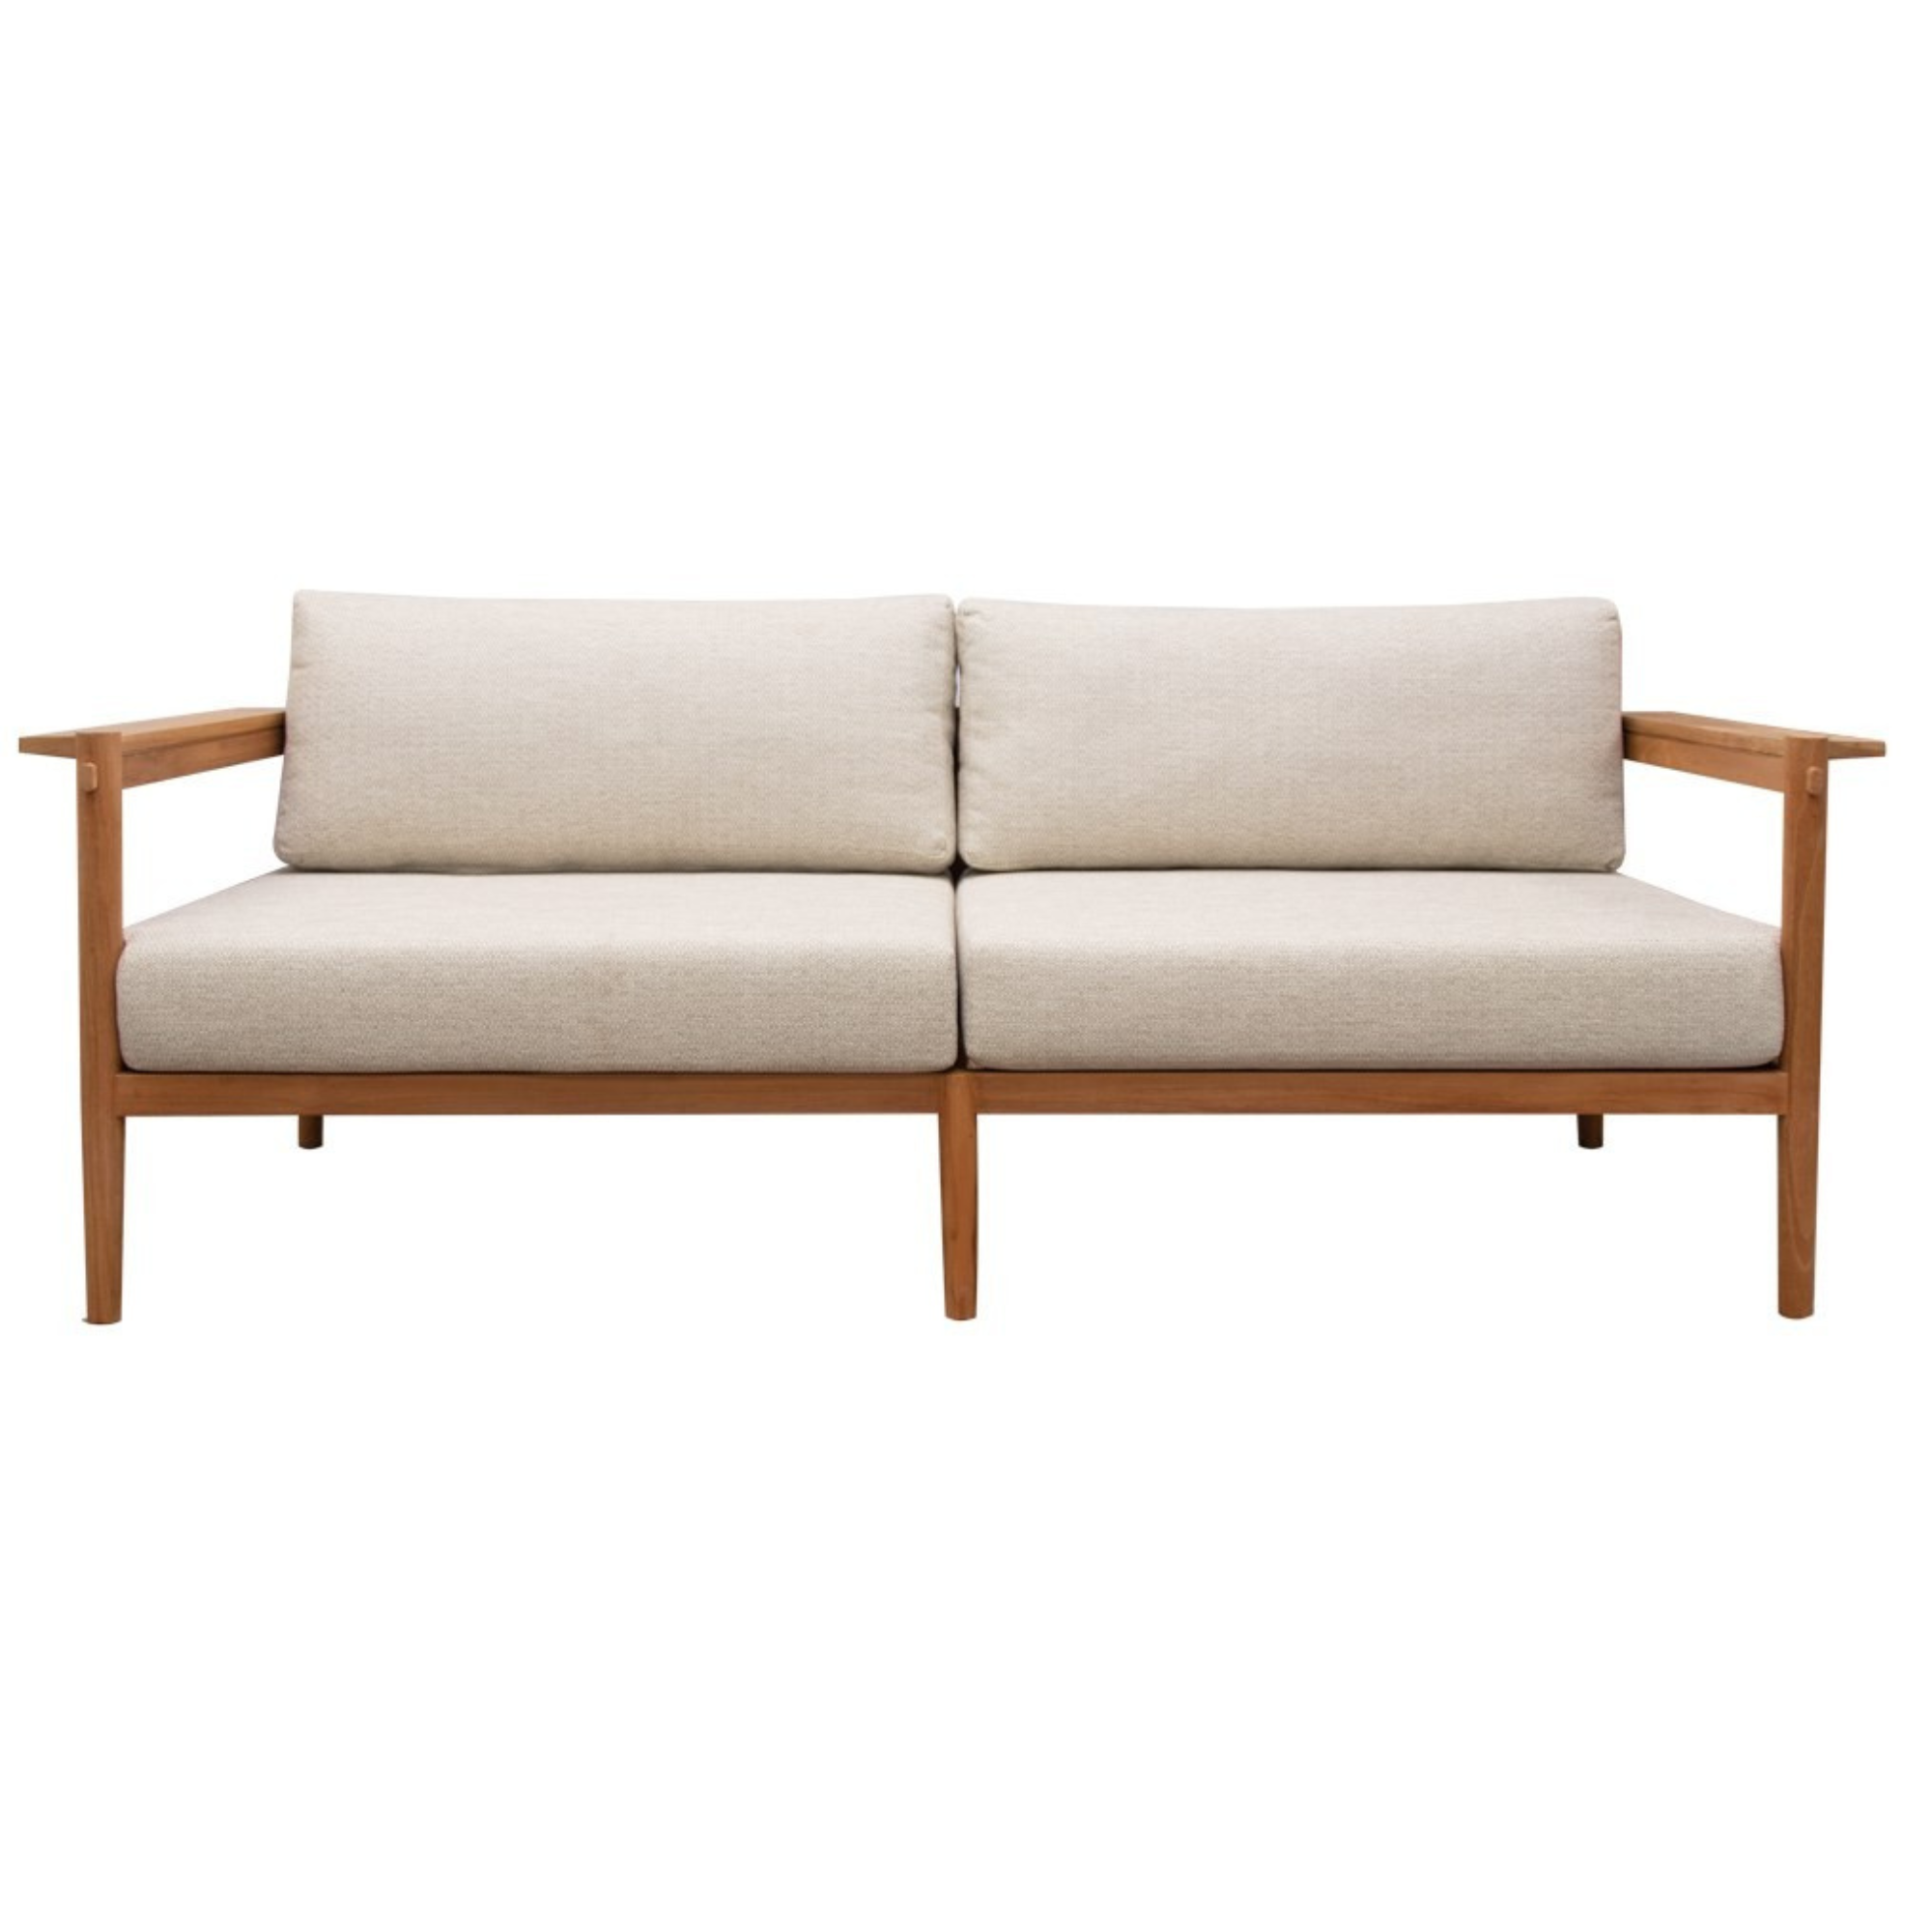 MOBY TEAK OUTDOOR 3 SEATER SOFA